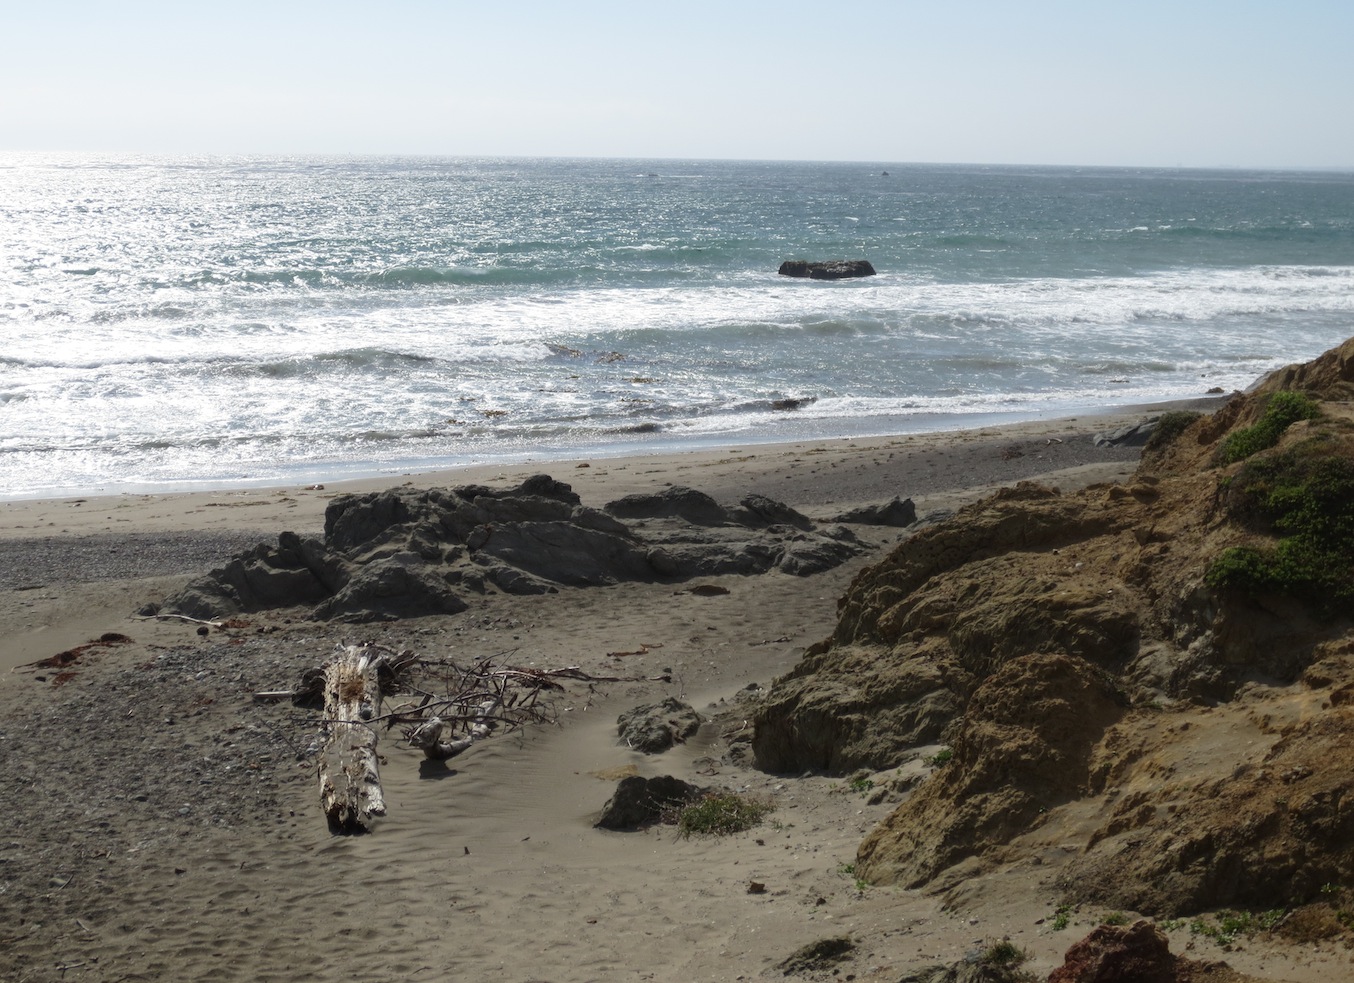 A shot of the beach on the Pacific coastline in California